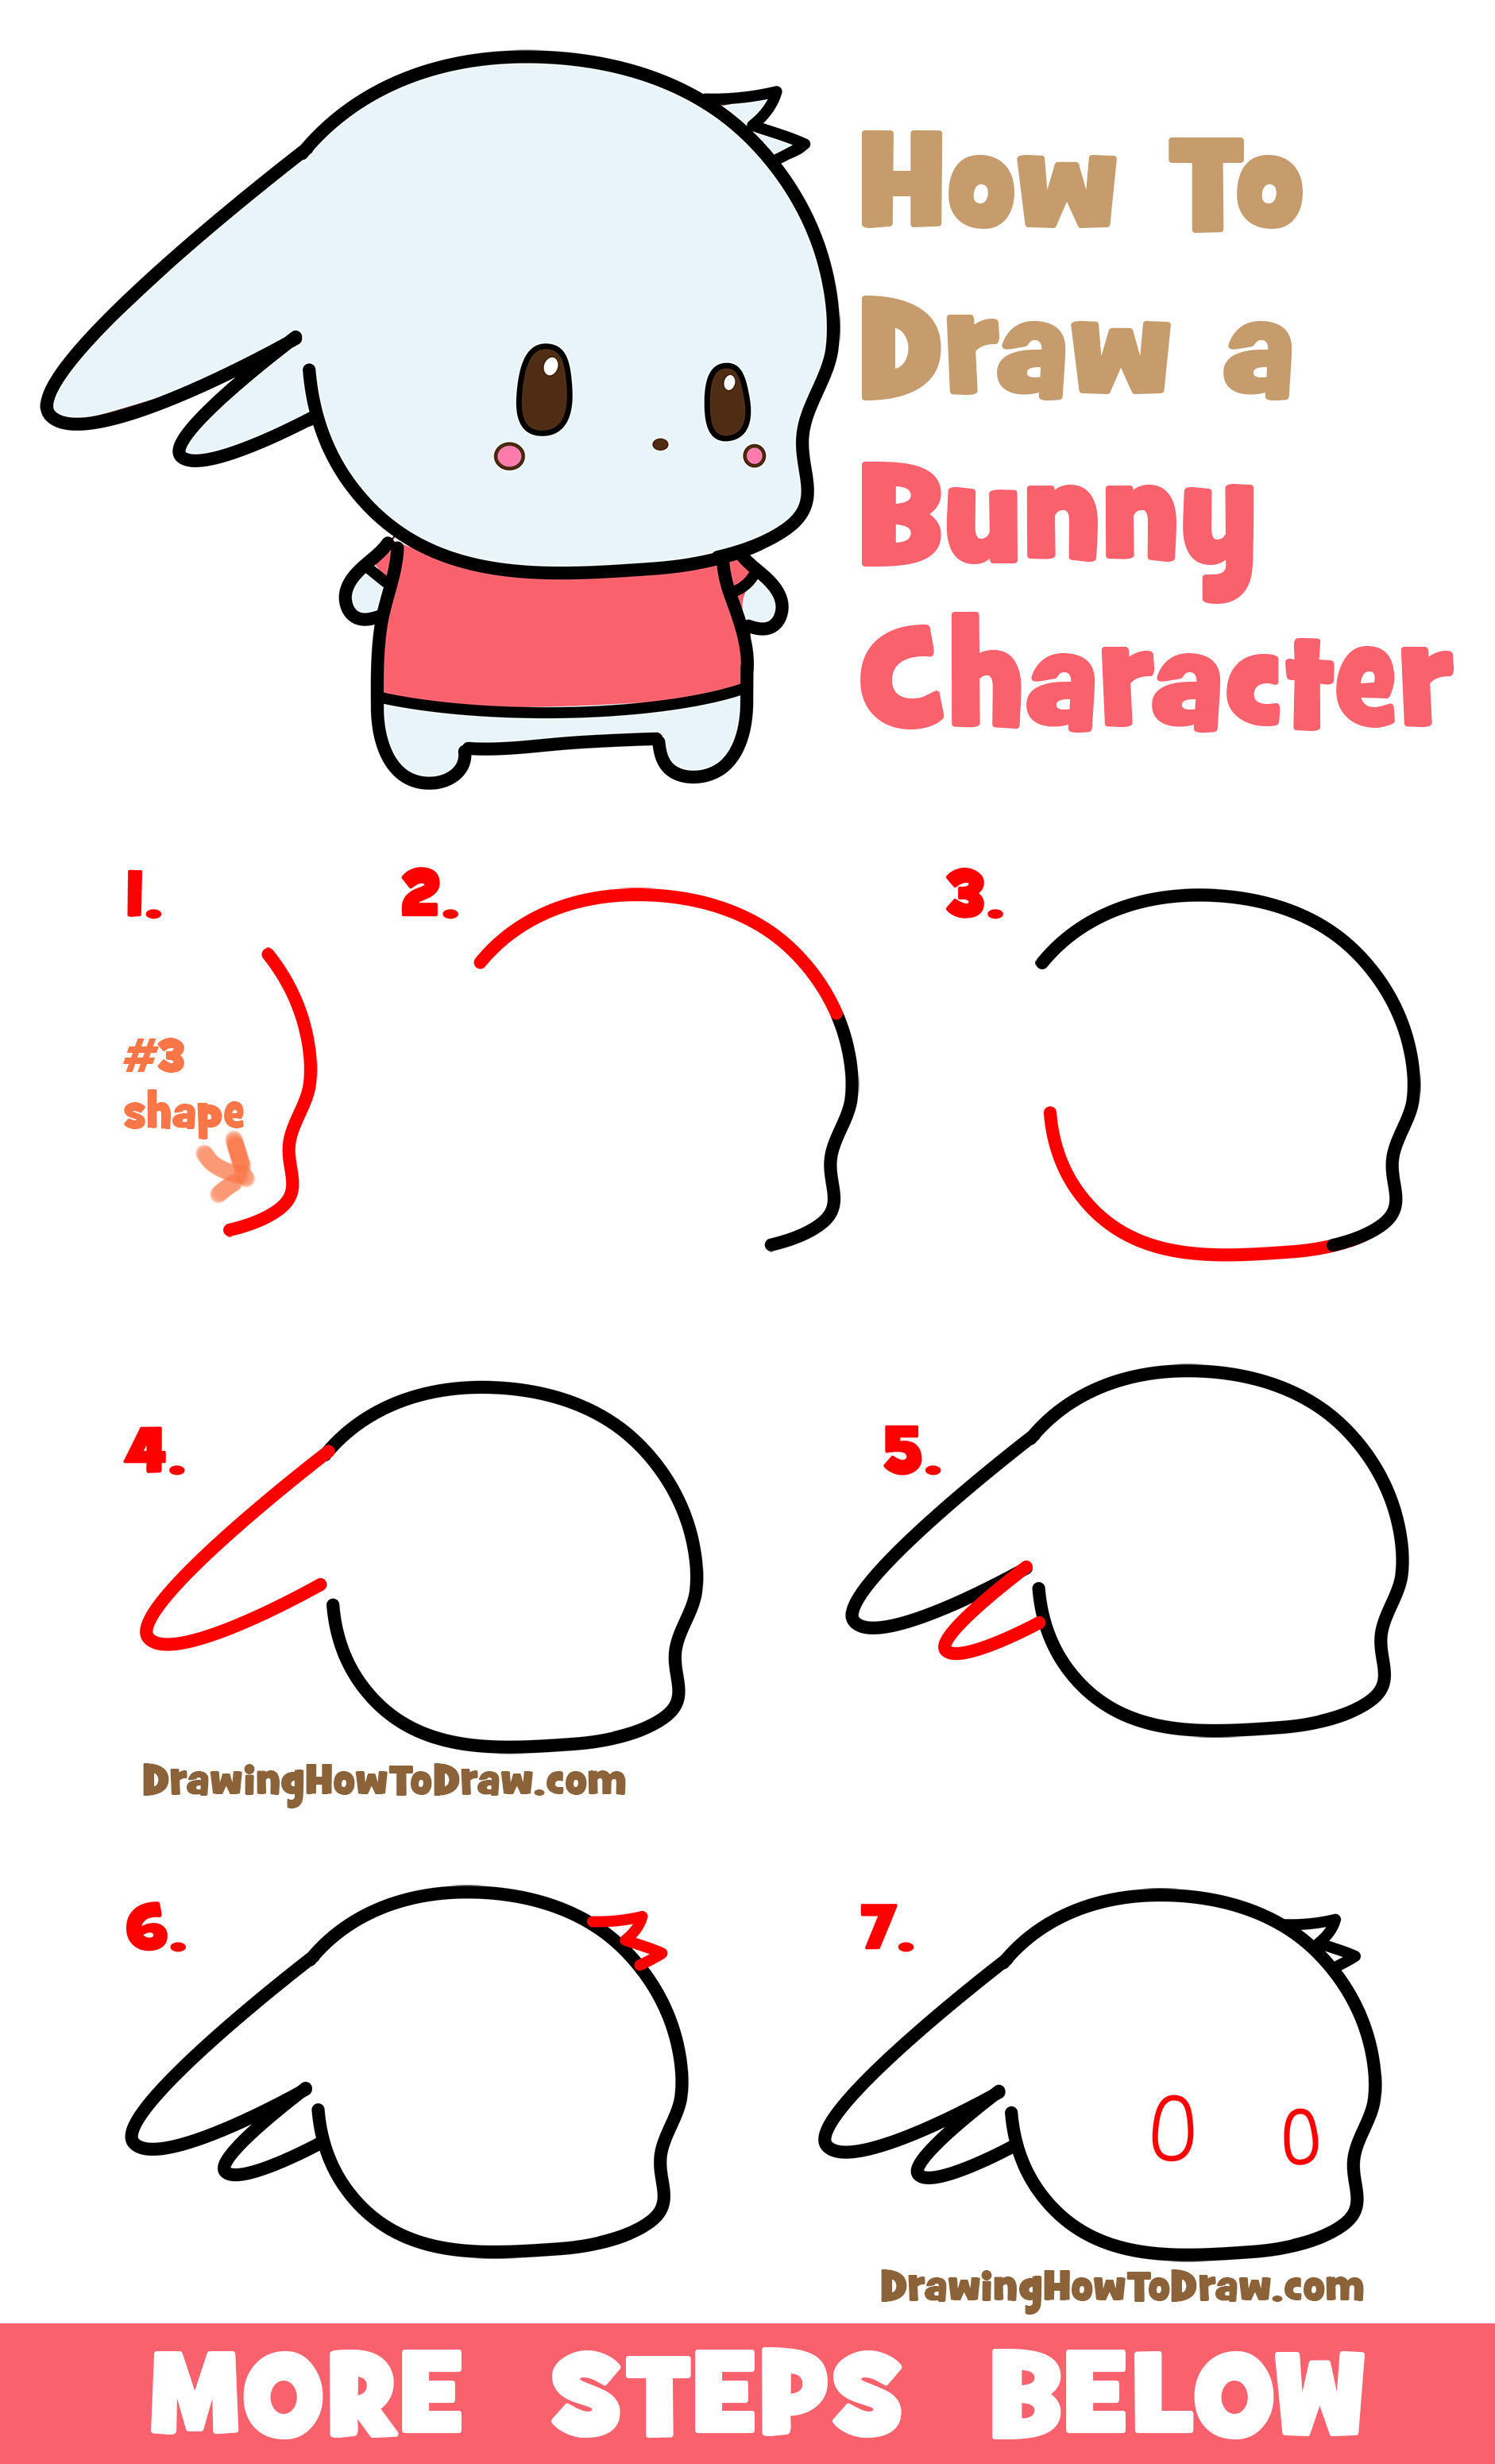 How To Draw 100 Adorable Stuff For Kids: A Simple Step-by-Step and